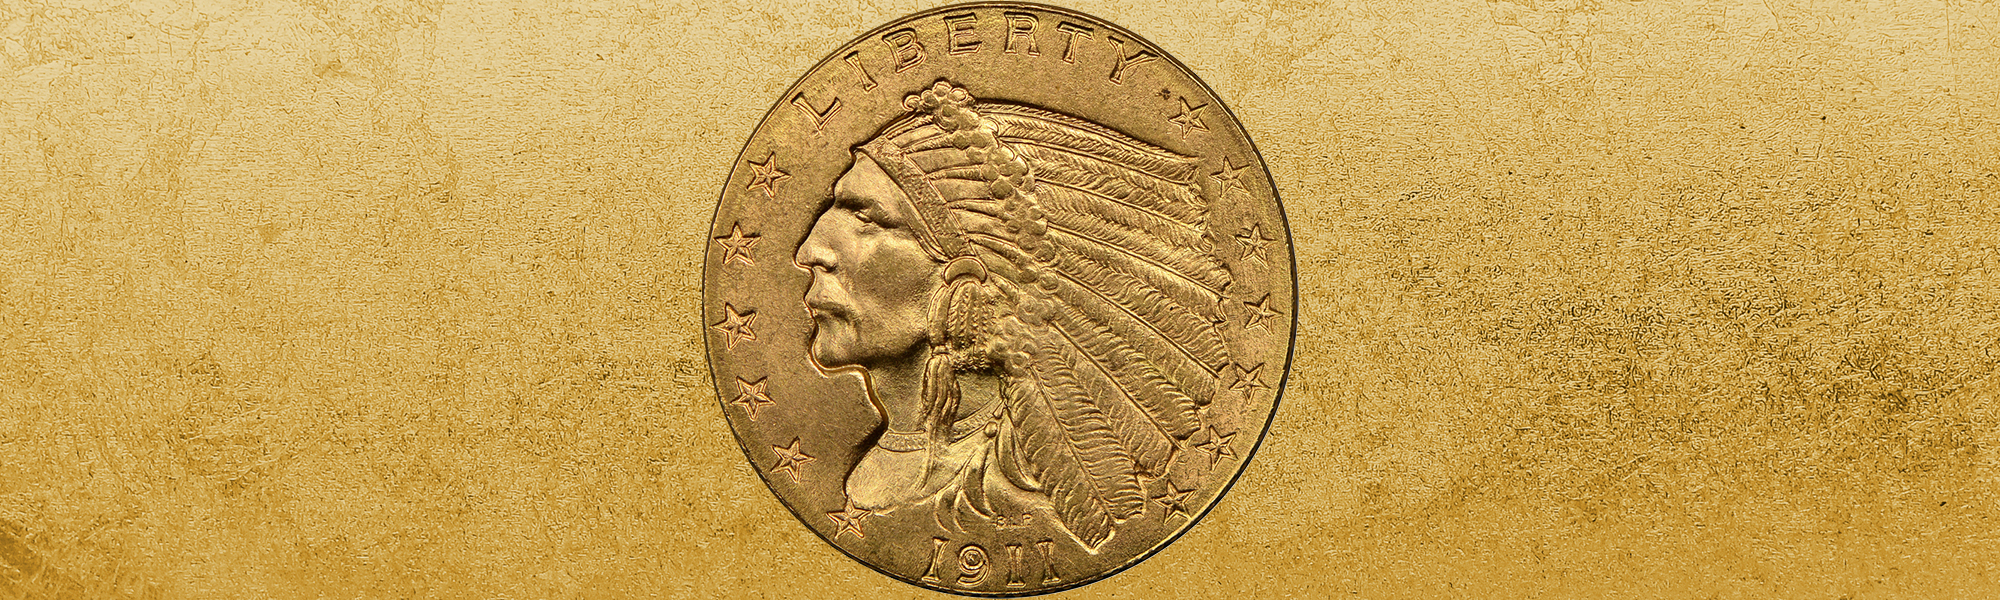 How Much Are Native American Coins Worth?